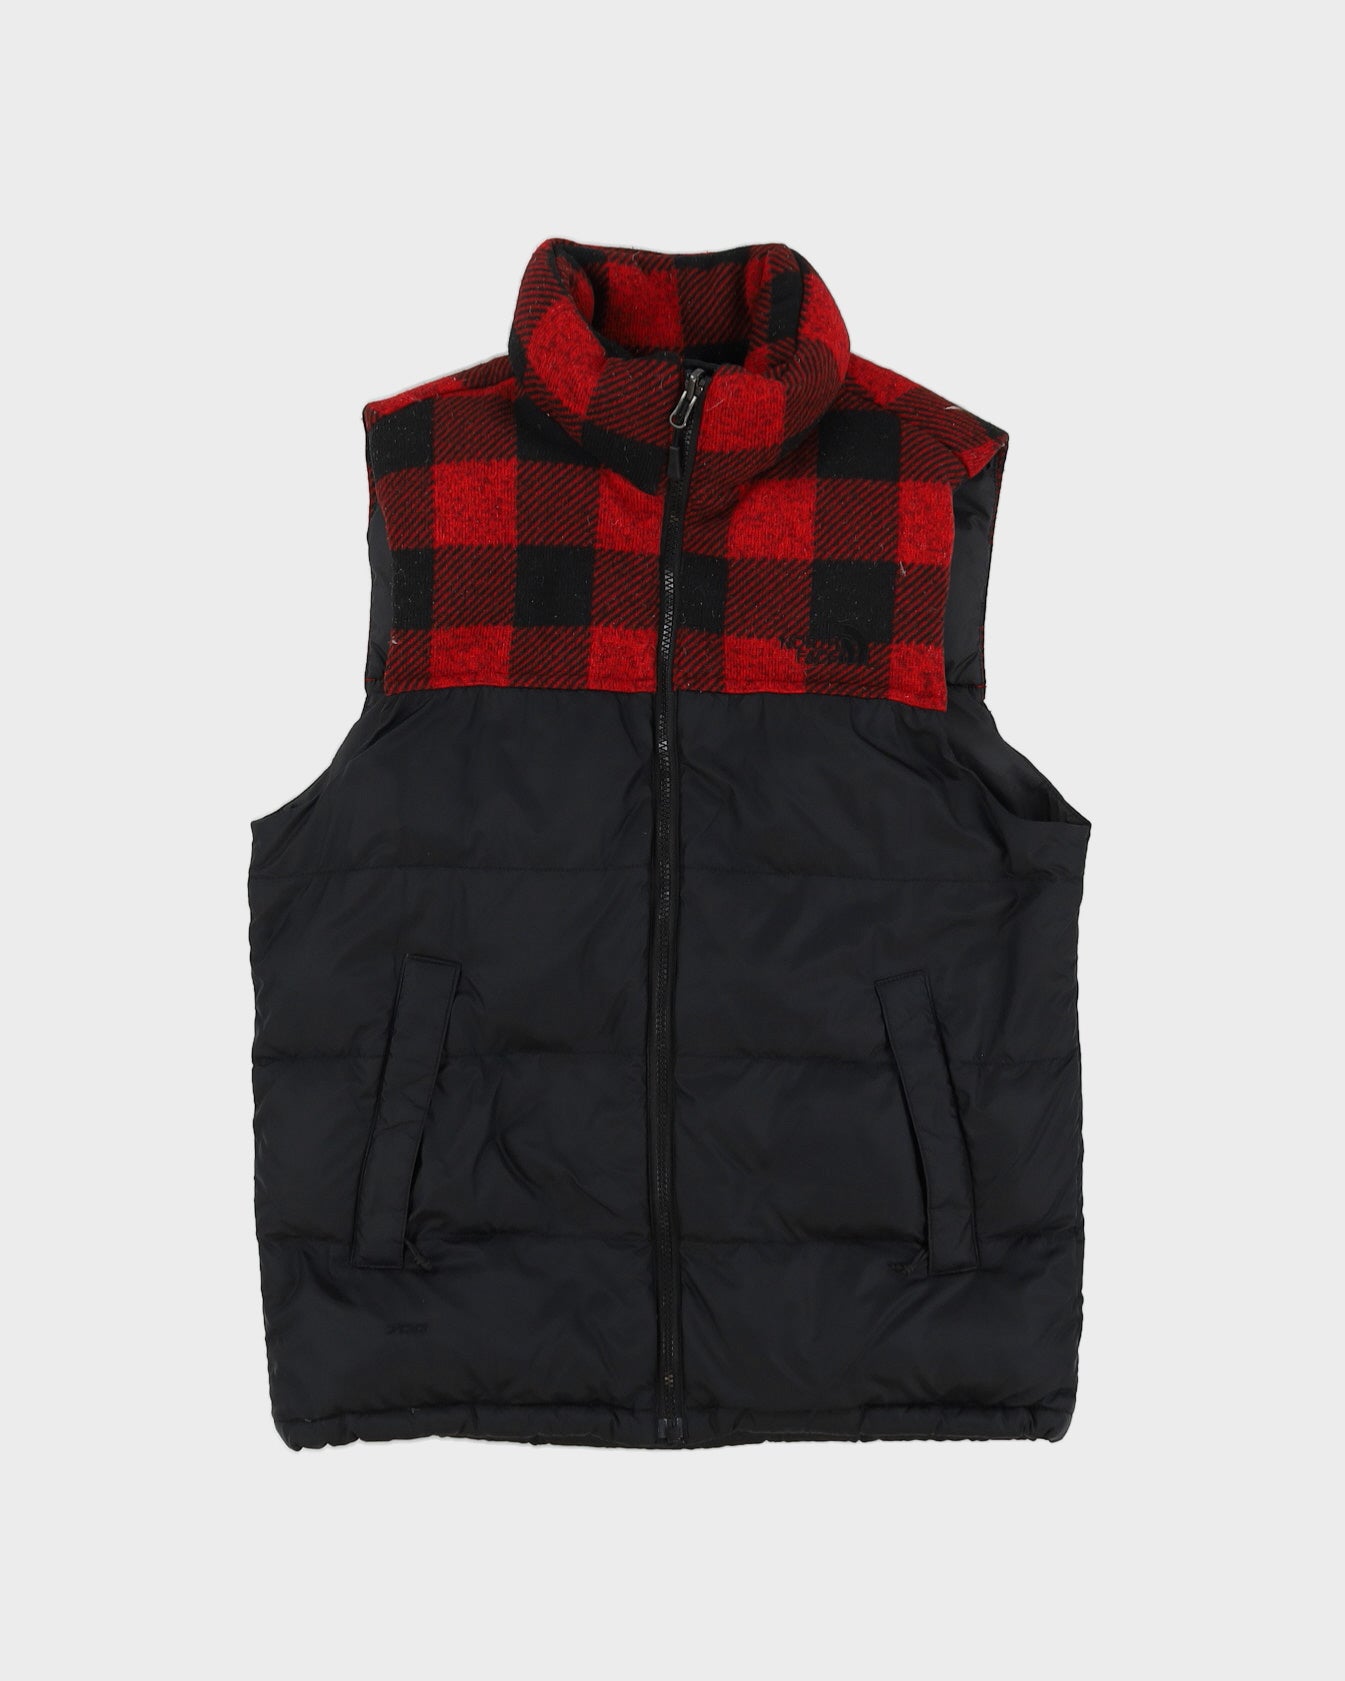 00s The North Face 700 Black / Red Puffer Gilet - S